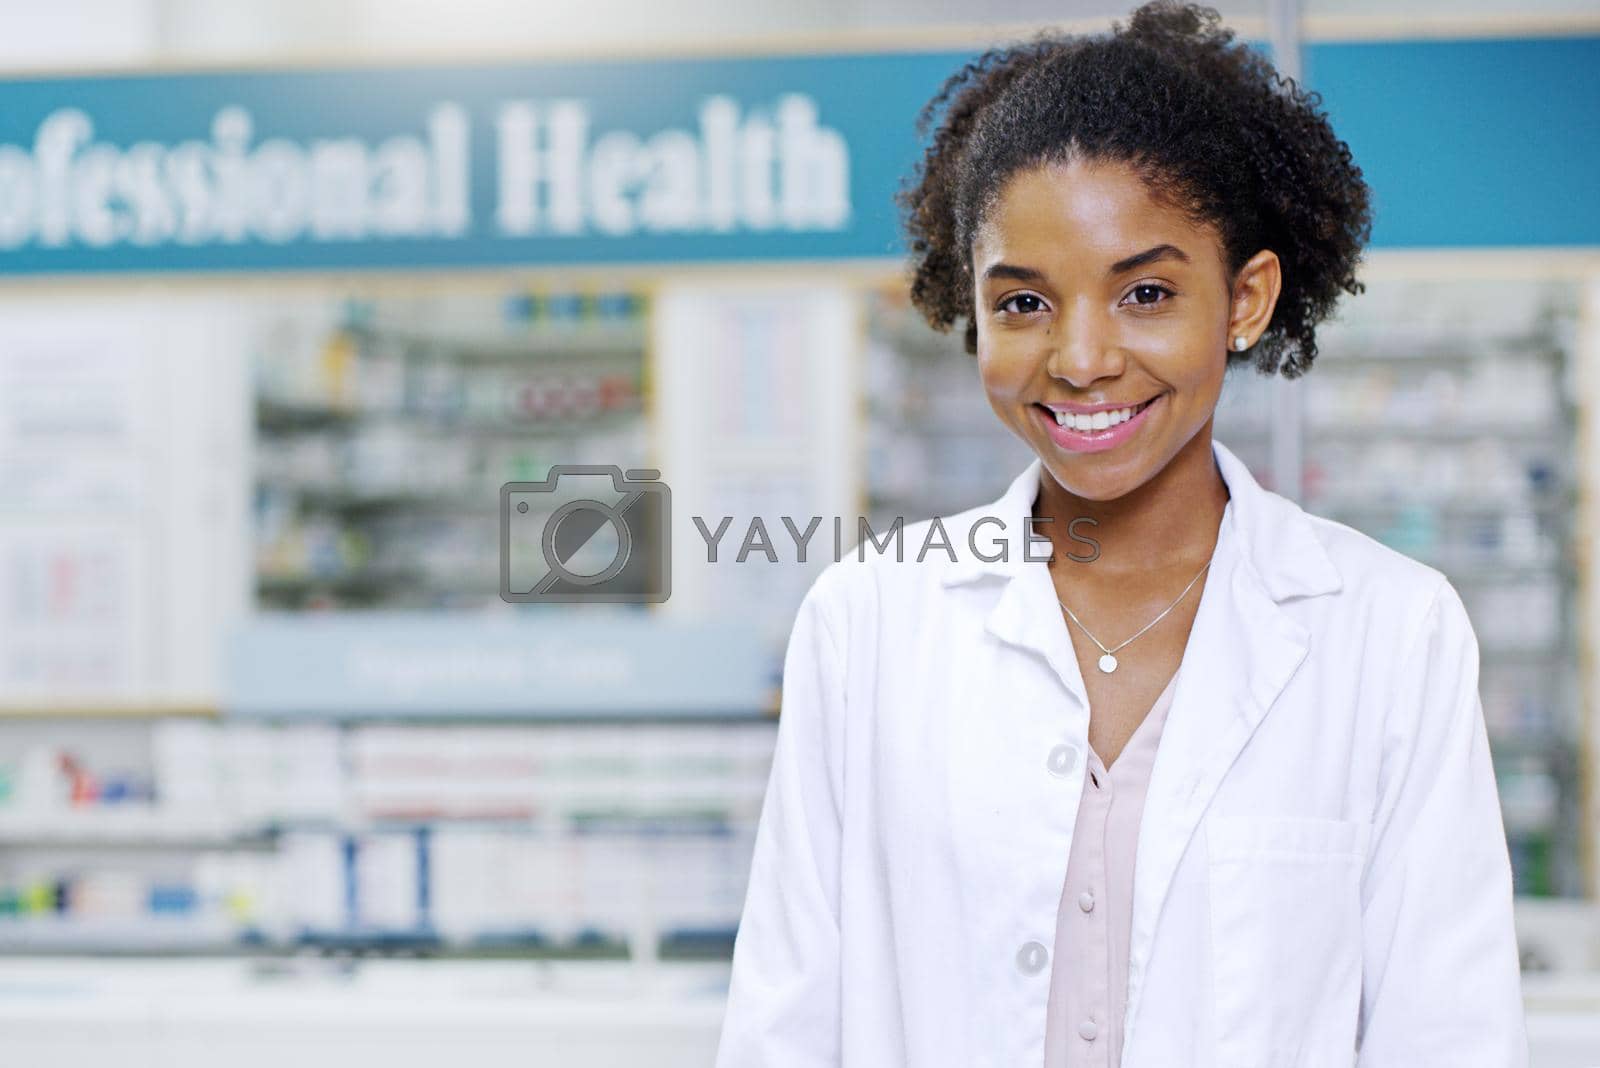 Royalty free image of With us your wellbeing is the first priority. Portrait of an attractive young pharmacist smiling and posing in a pharmacy. by YuriArcurs